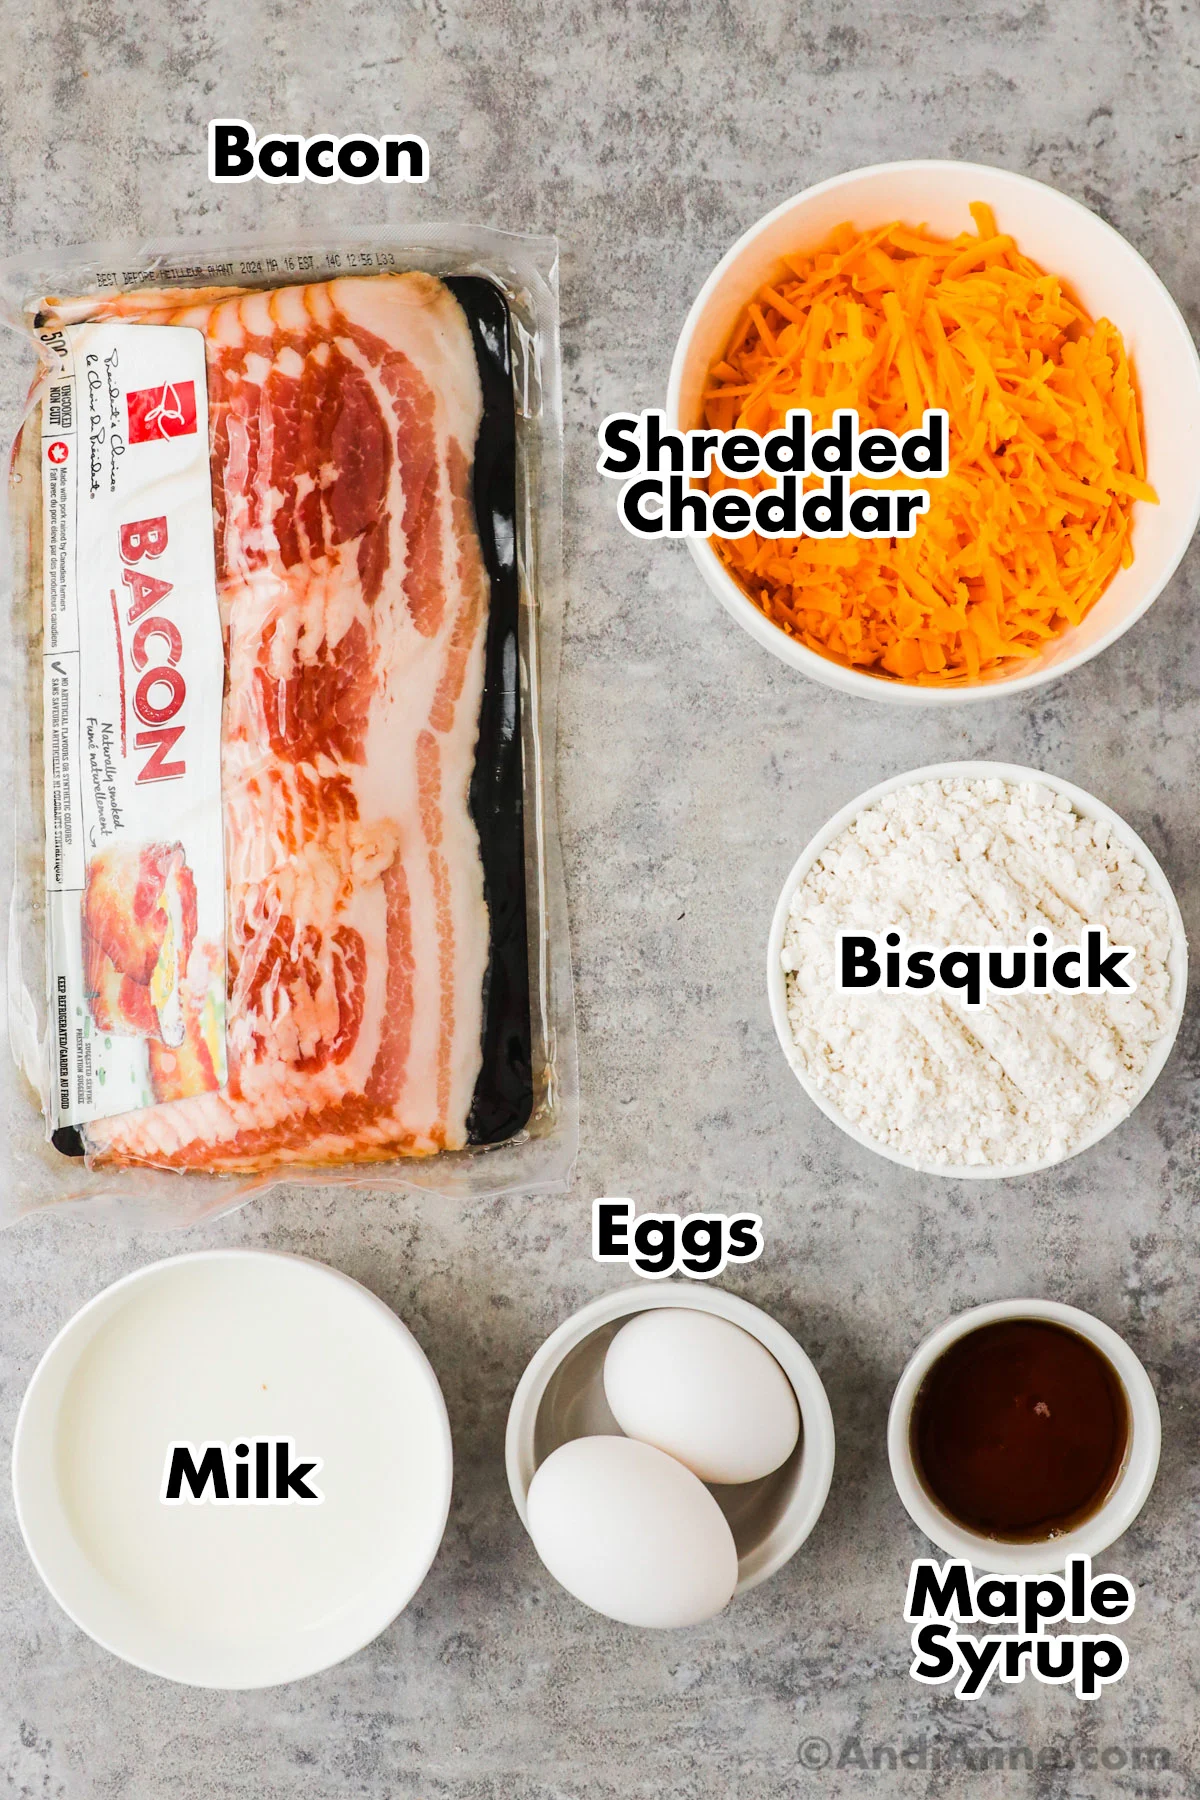 Recipe ingredients including a package of bacon, bowl of shredded cheese, bowl of bisquick mix, bowl of milk, 2 eggs and maple syrup.